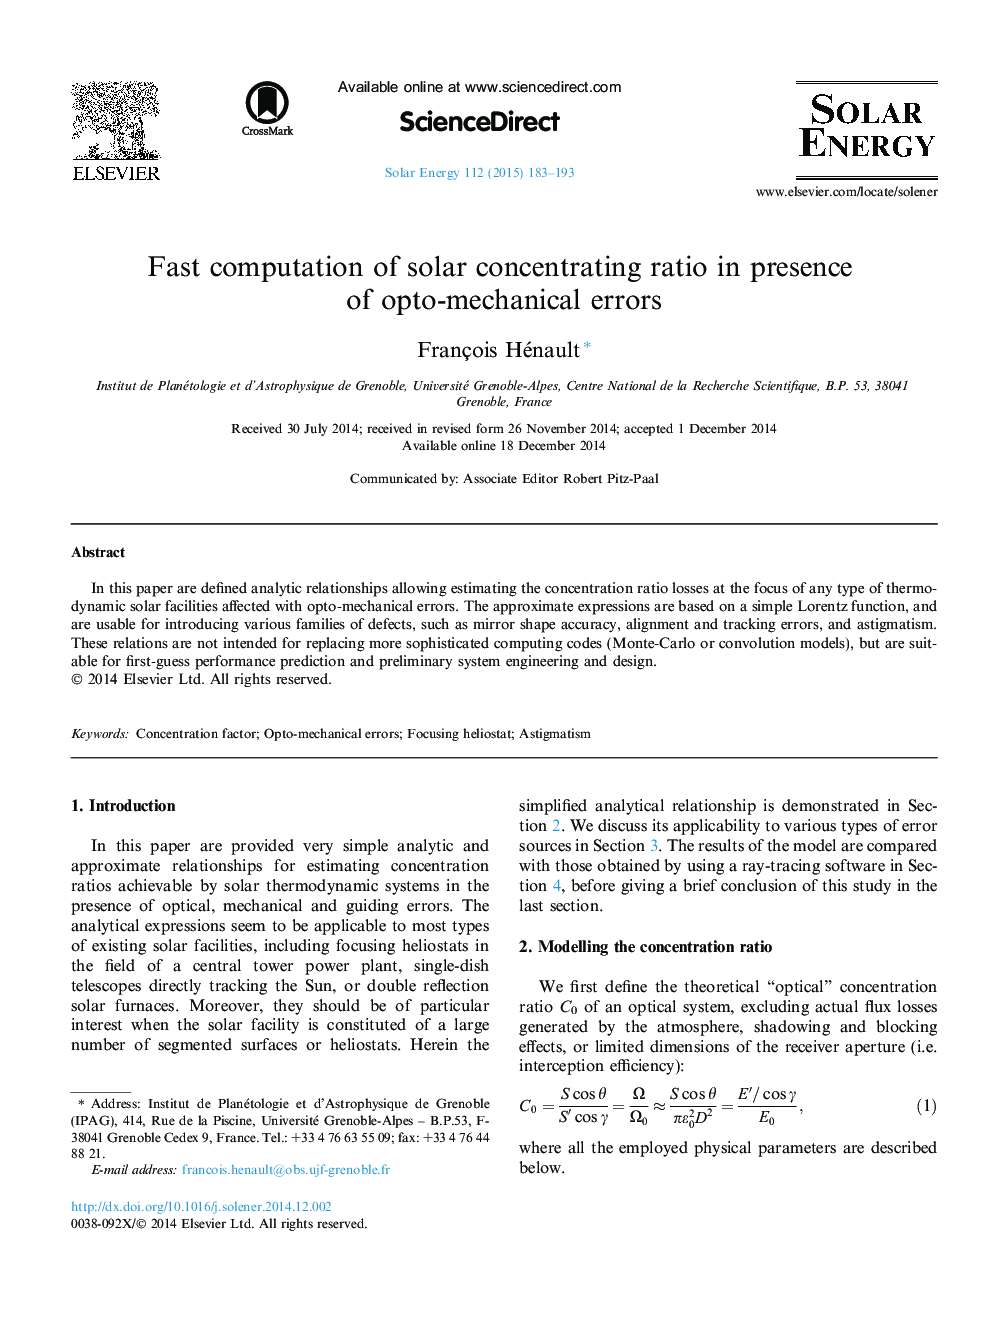 Fast computation of solar concentrating ratio in presence of opto-mechanical errors